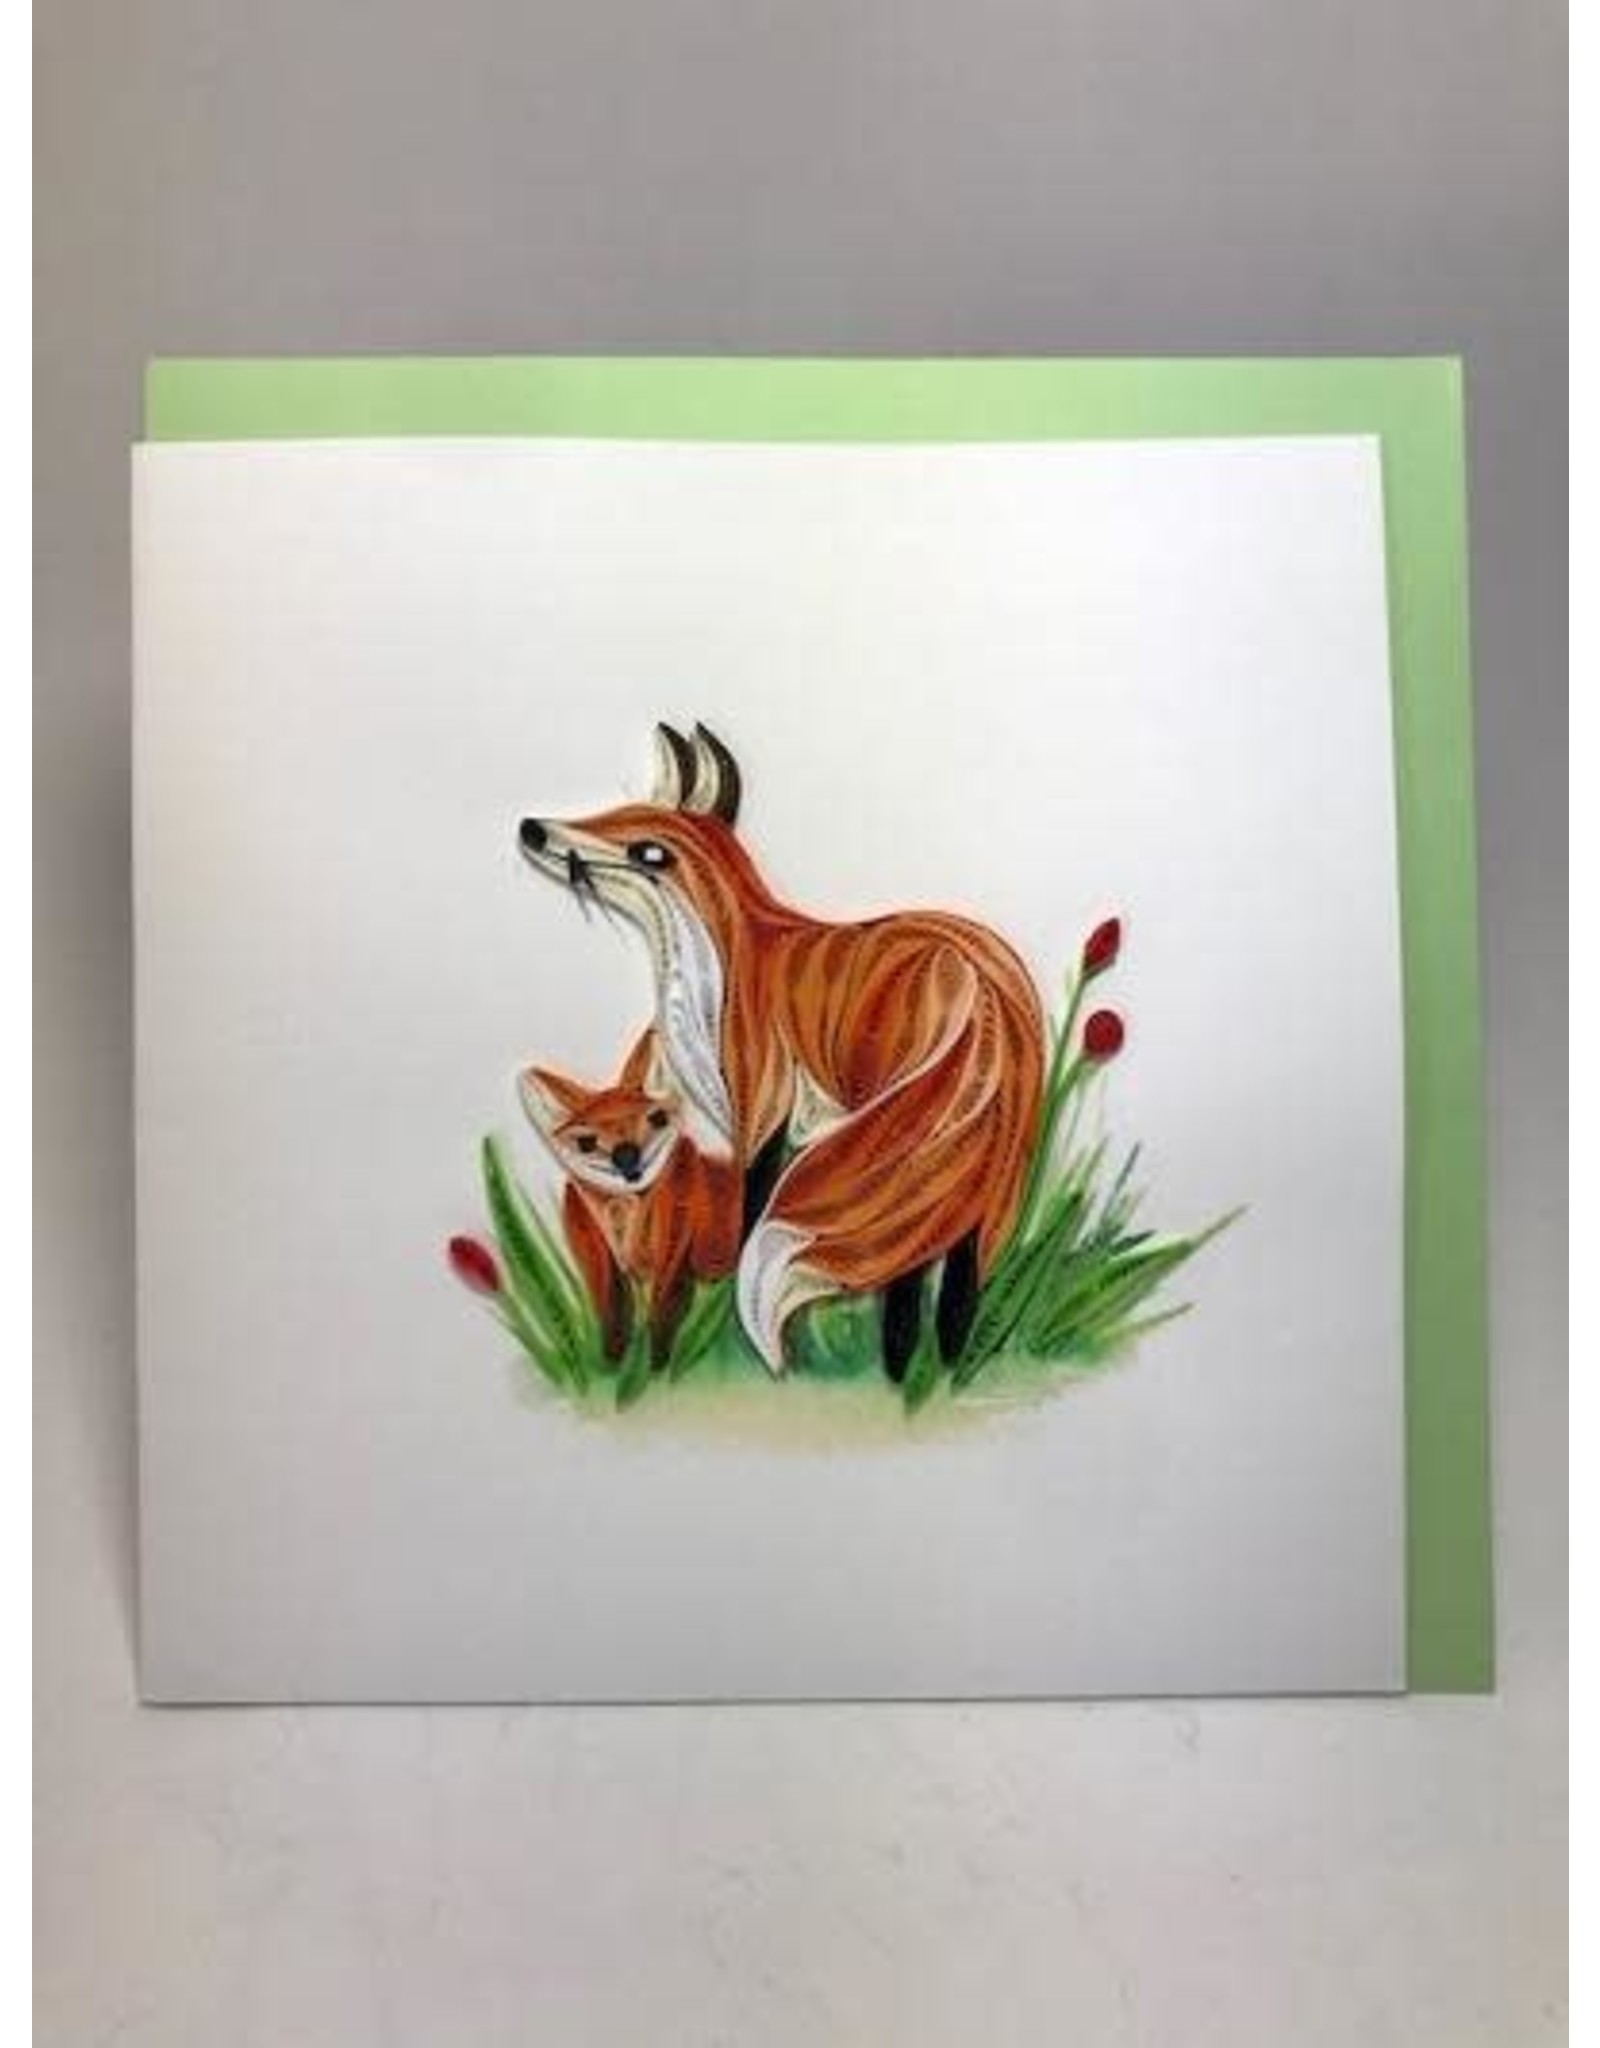 Trade roots Fox and Cub Quilling Card, Vietnam